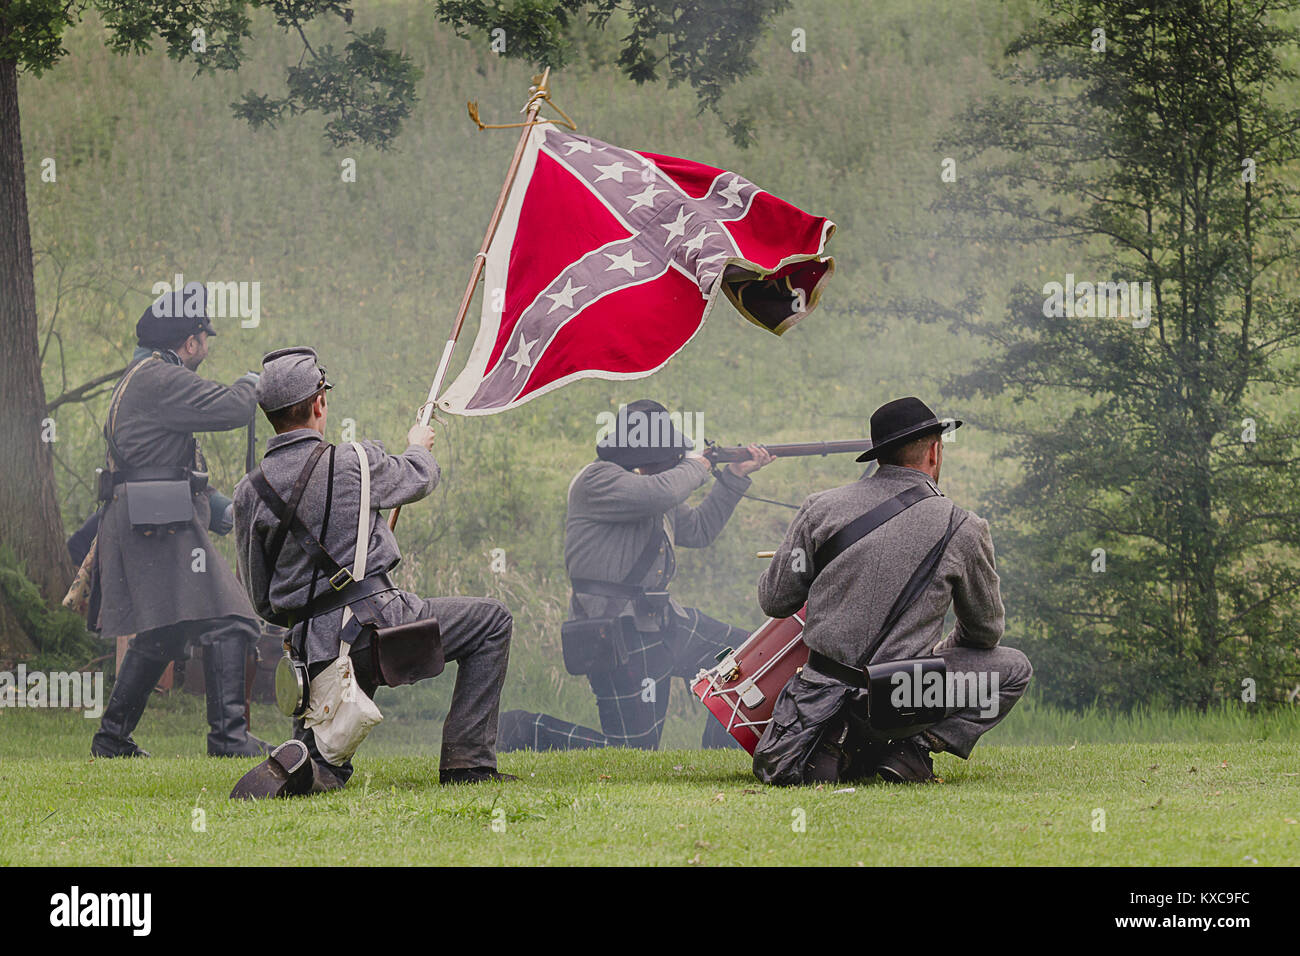 A group of four confederate soldiers firing weapon with a southern flag at a reenactment Stock Photo